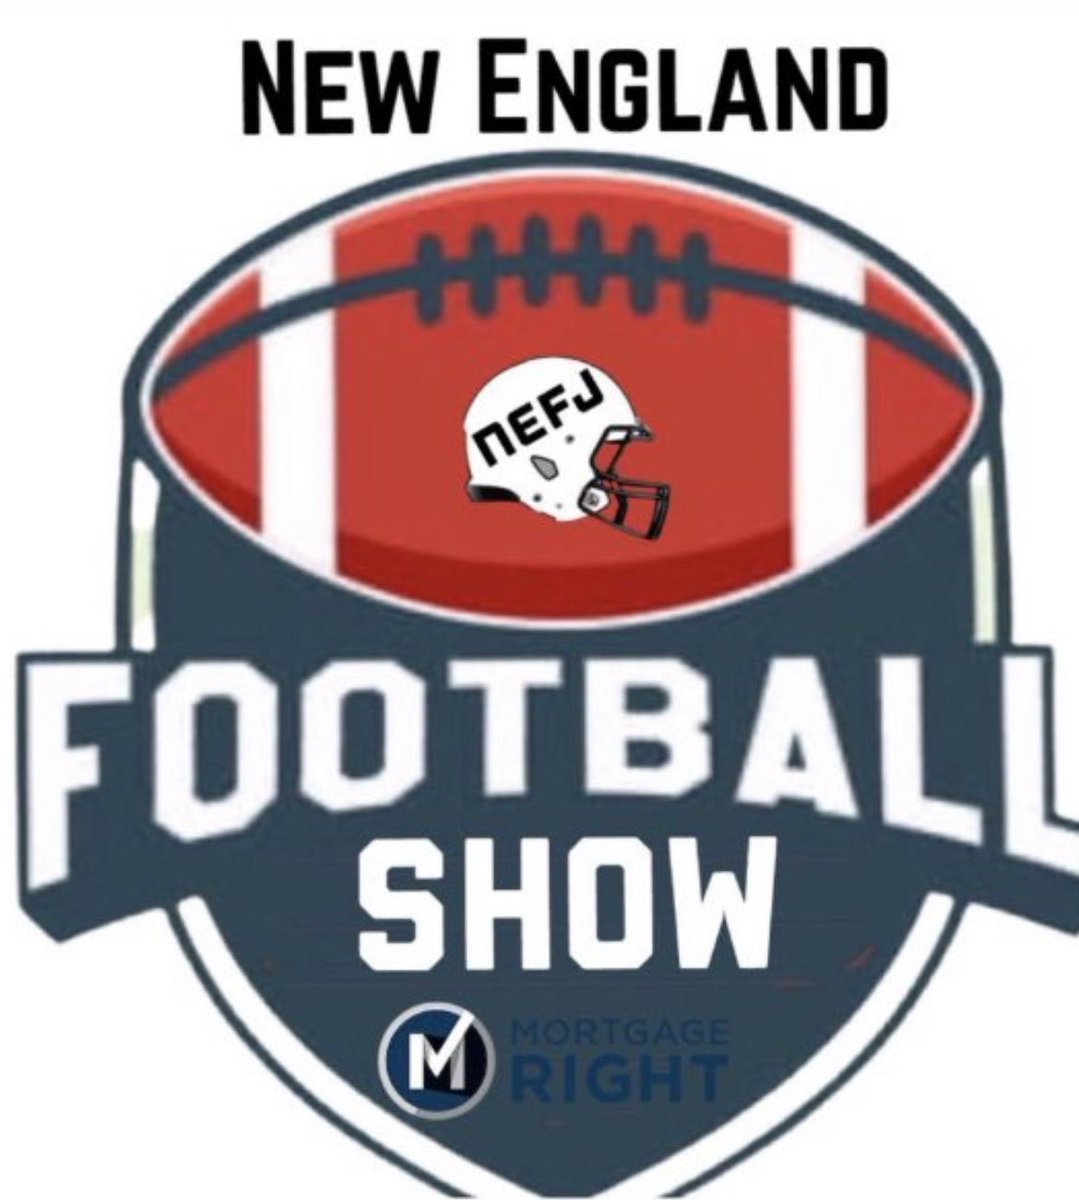 It’s (FINALLY) draft week! Don’t miss The New England Football Show (presented by @MortgageRightCo) at 8 on Facebook, X, Twitch & YouTube We’ll have our final thoughts/predictions & we’ve also got plenty of college spring ball visits/games (BC, Harvard, Holy Cross, Stonehill,…